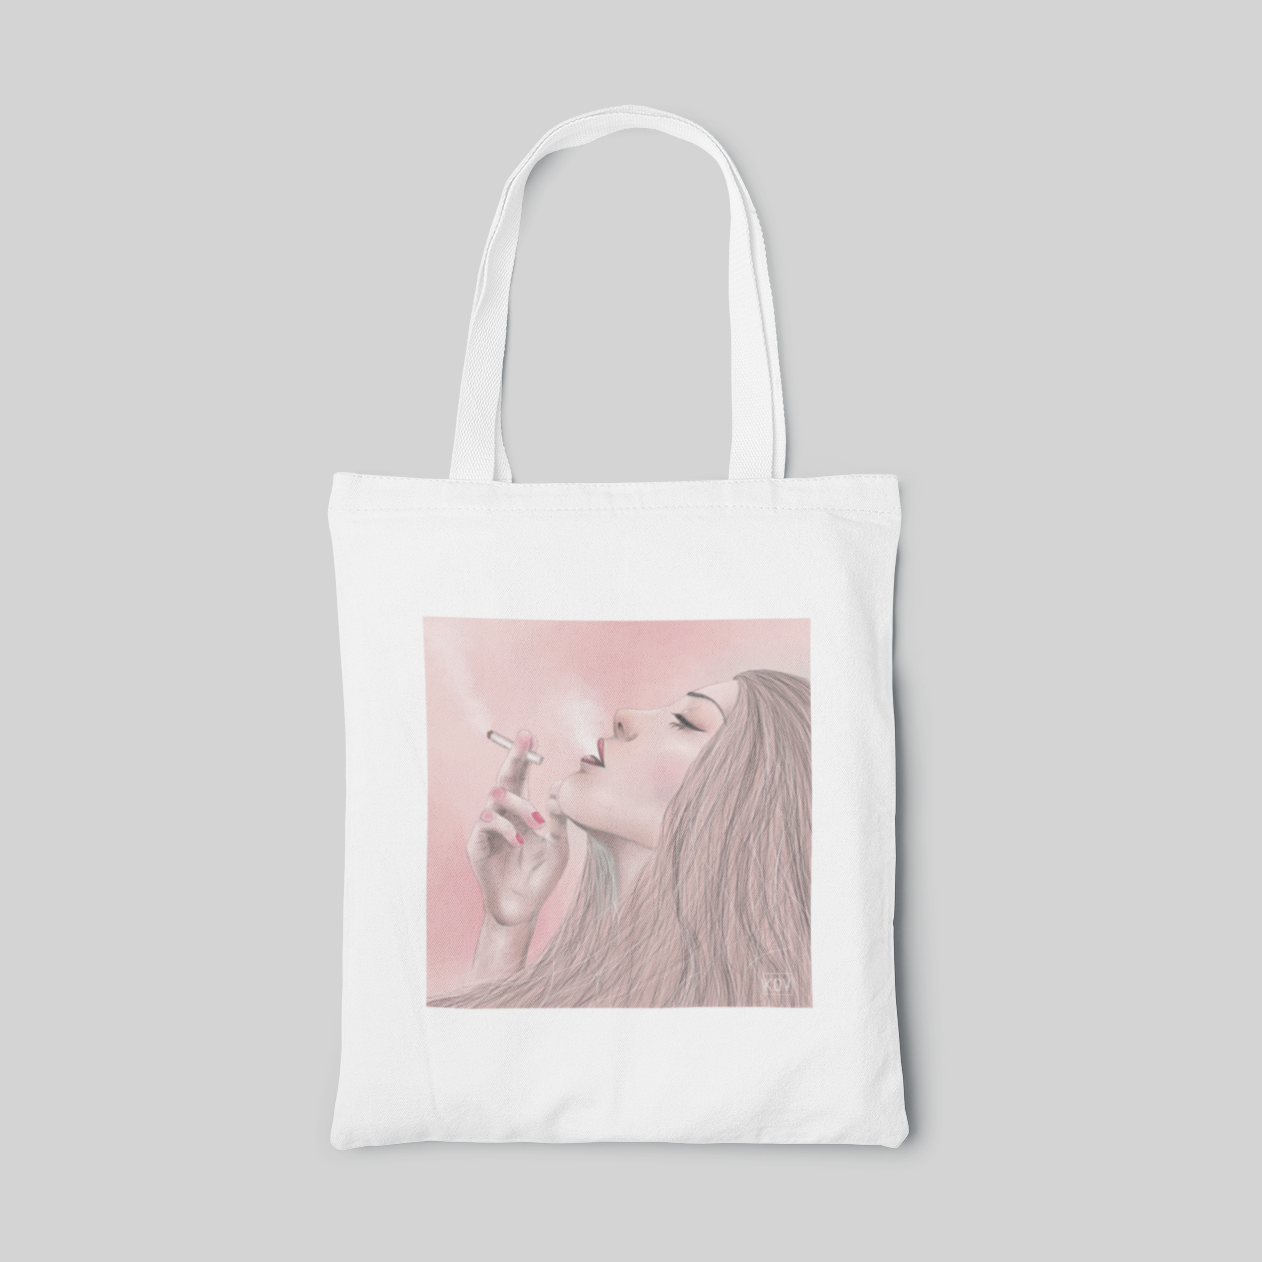 white designed tote bag with a smoking woman sketches in a pink background, front side